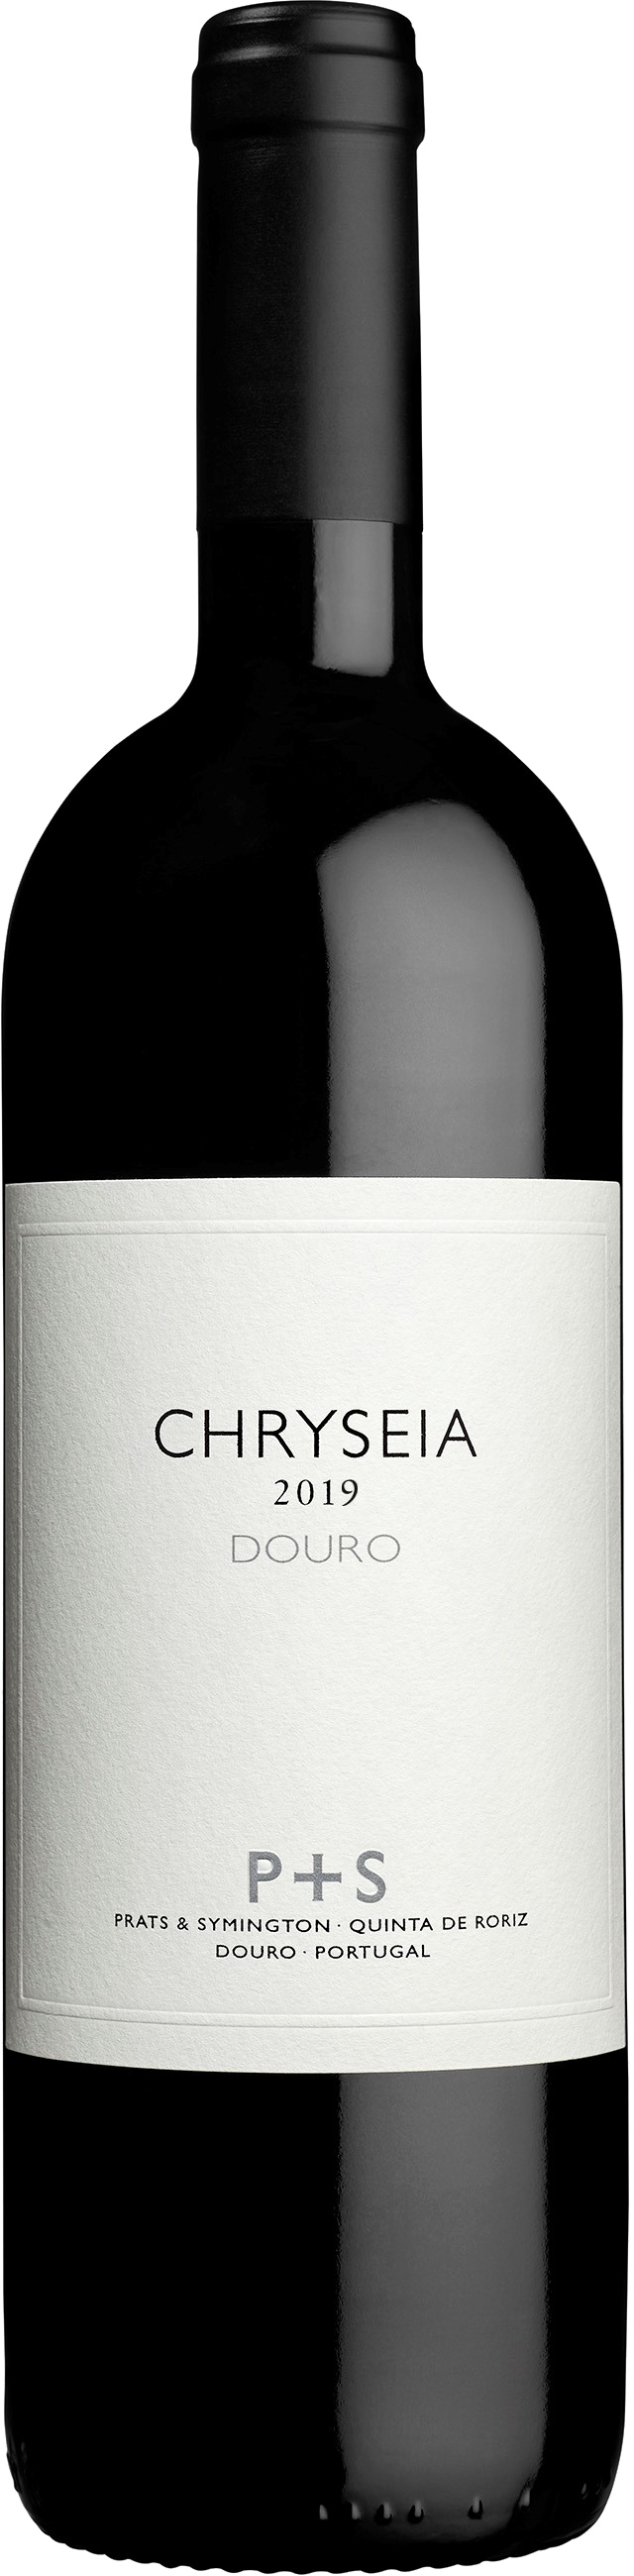 Product Image for P&S CHRYSEIA DOURO RED 2019